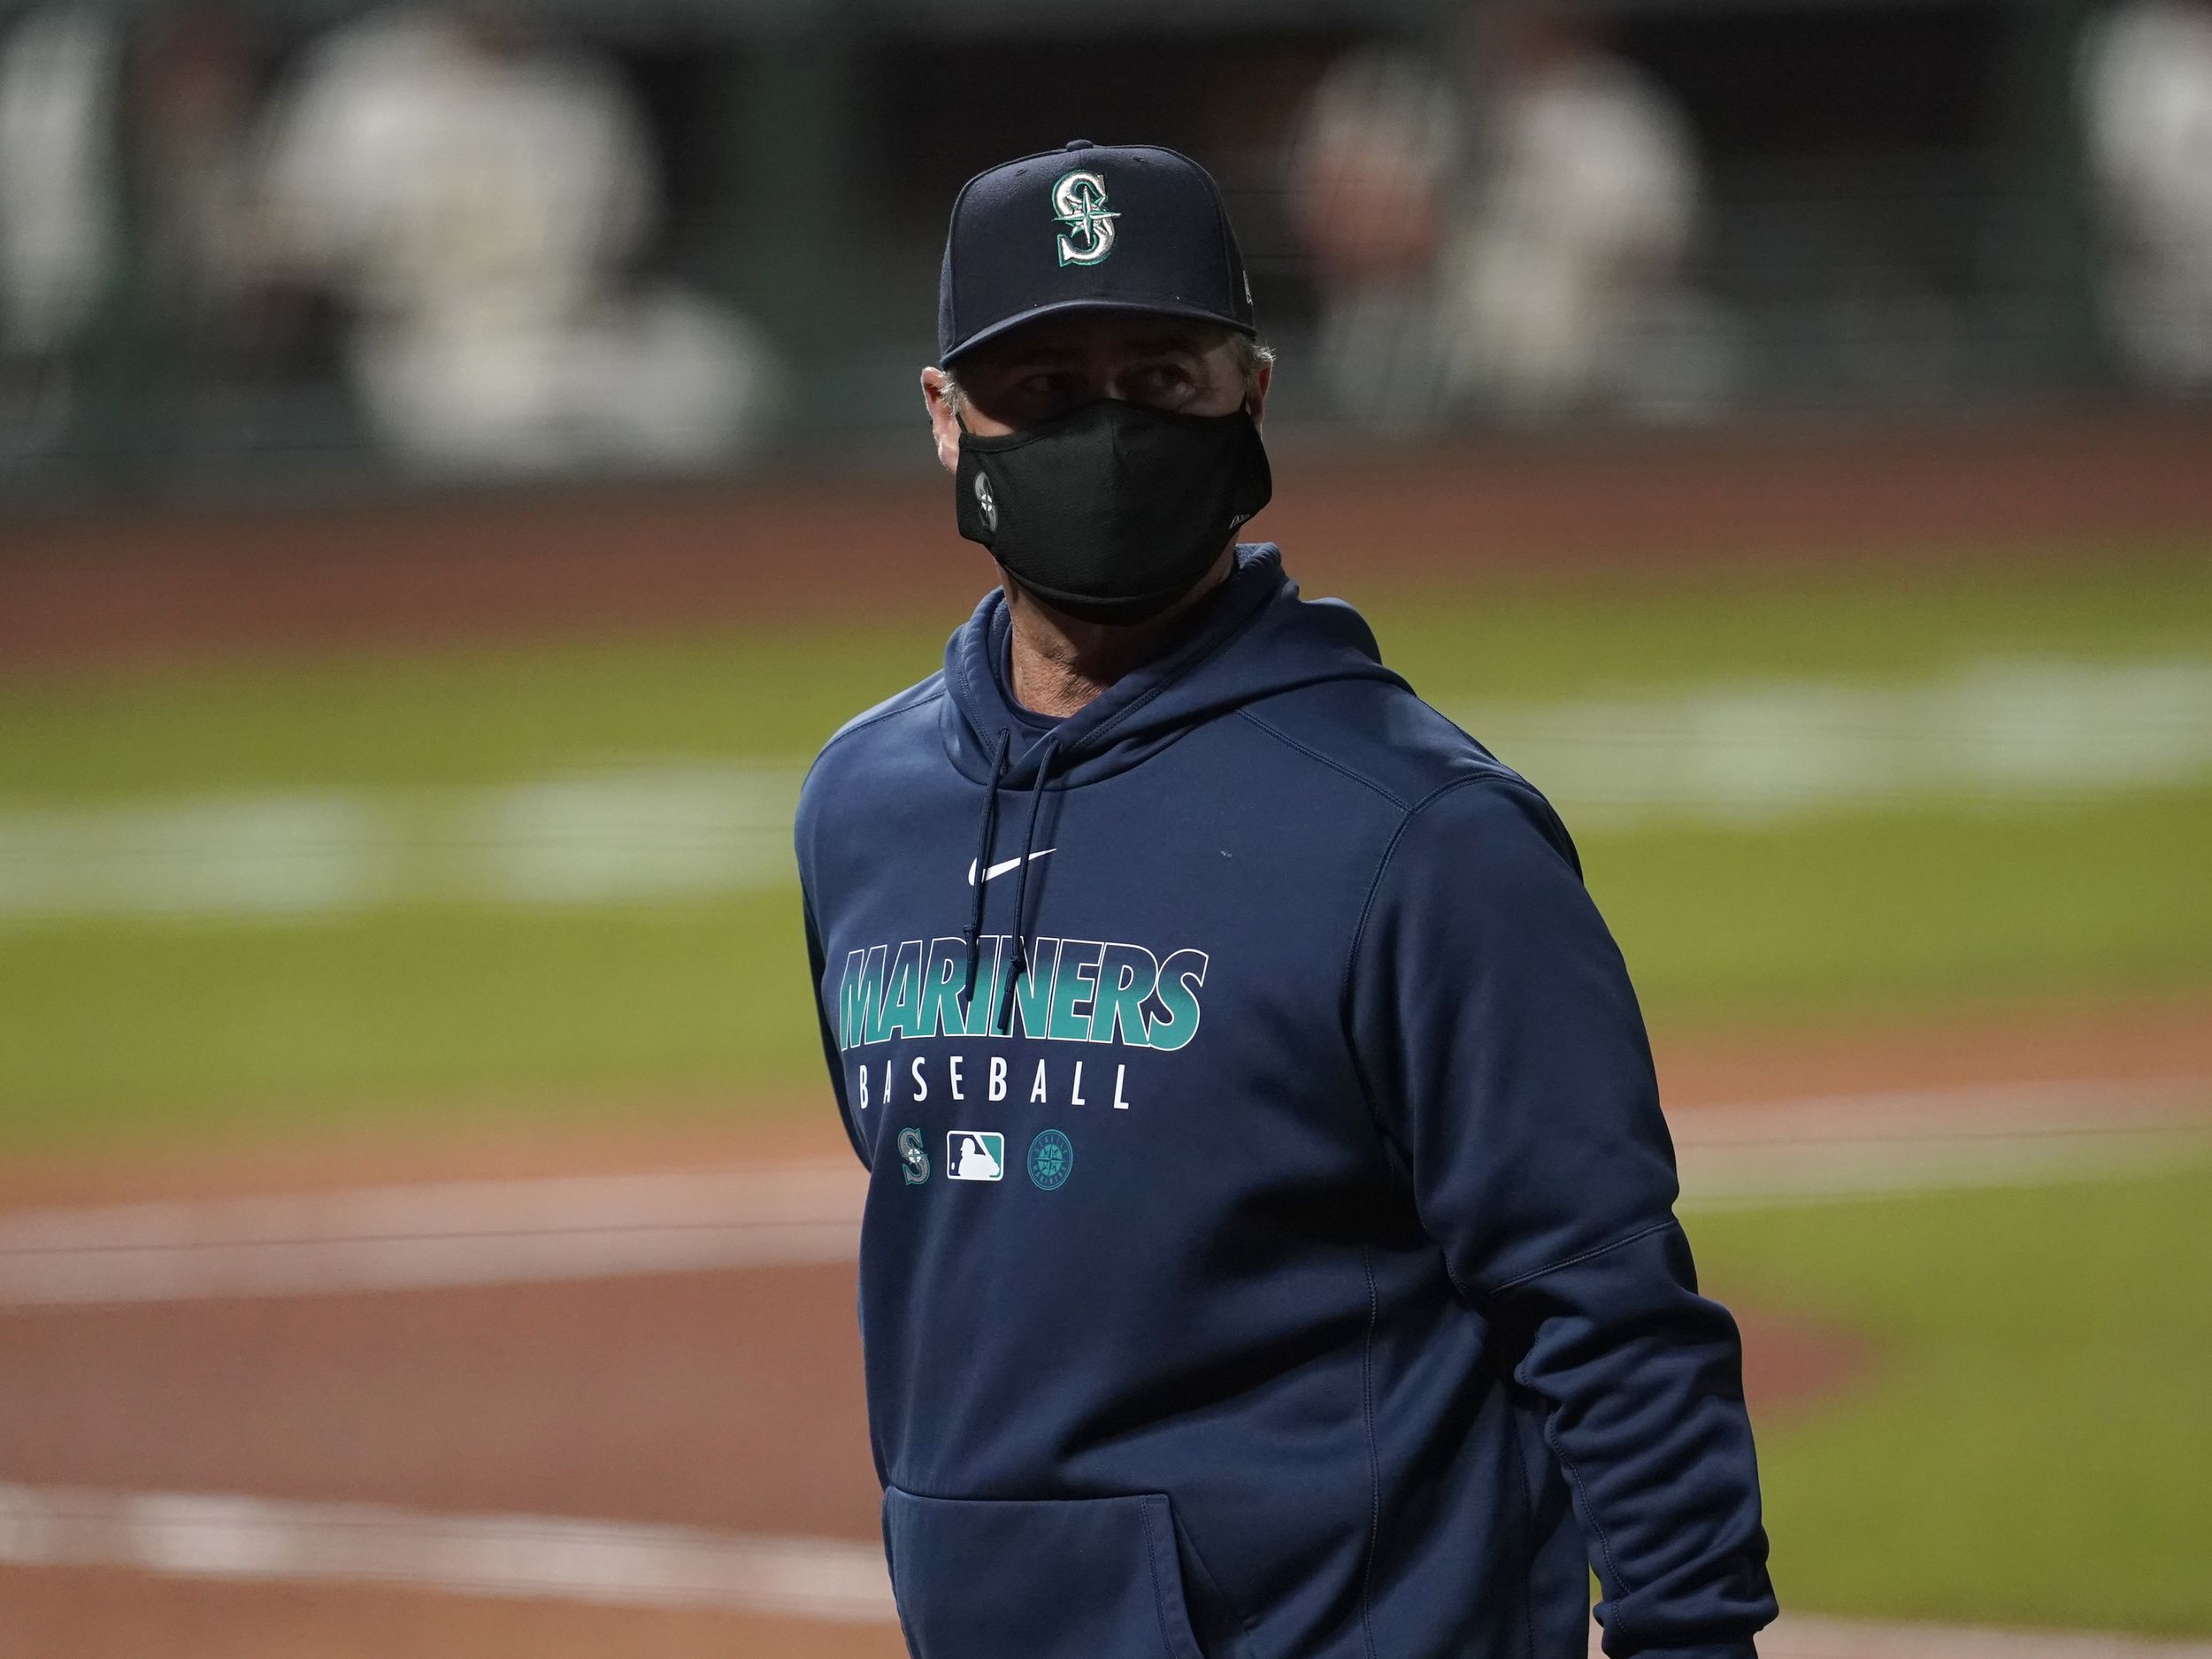 After years of planning and waiting, it's showtime for Servais as